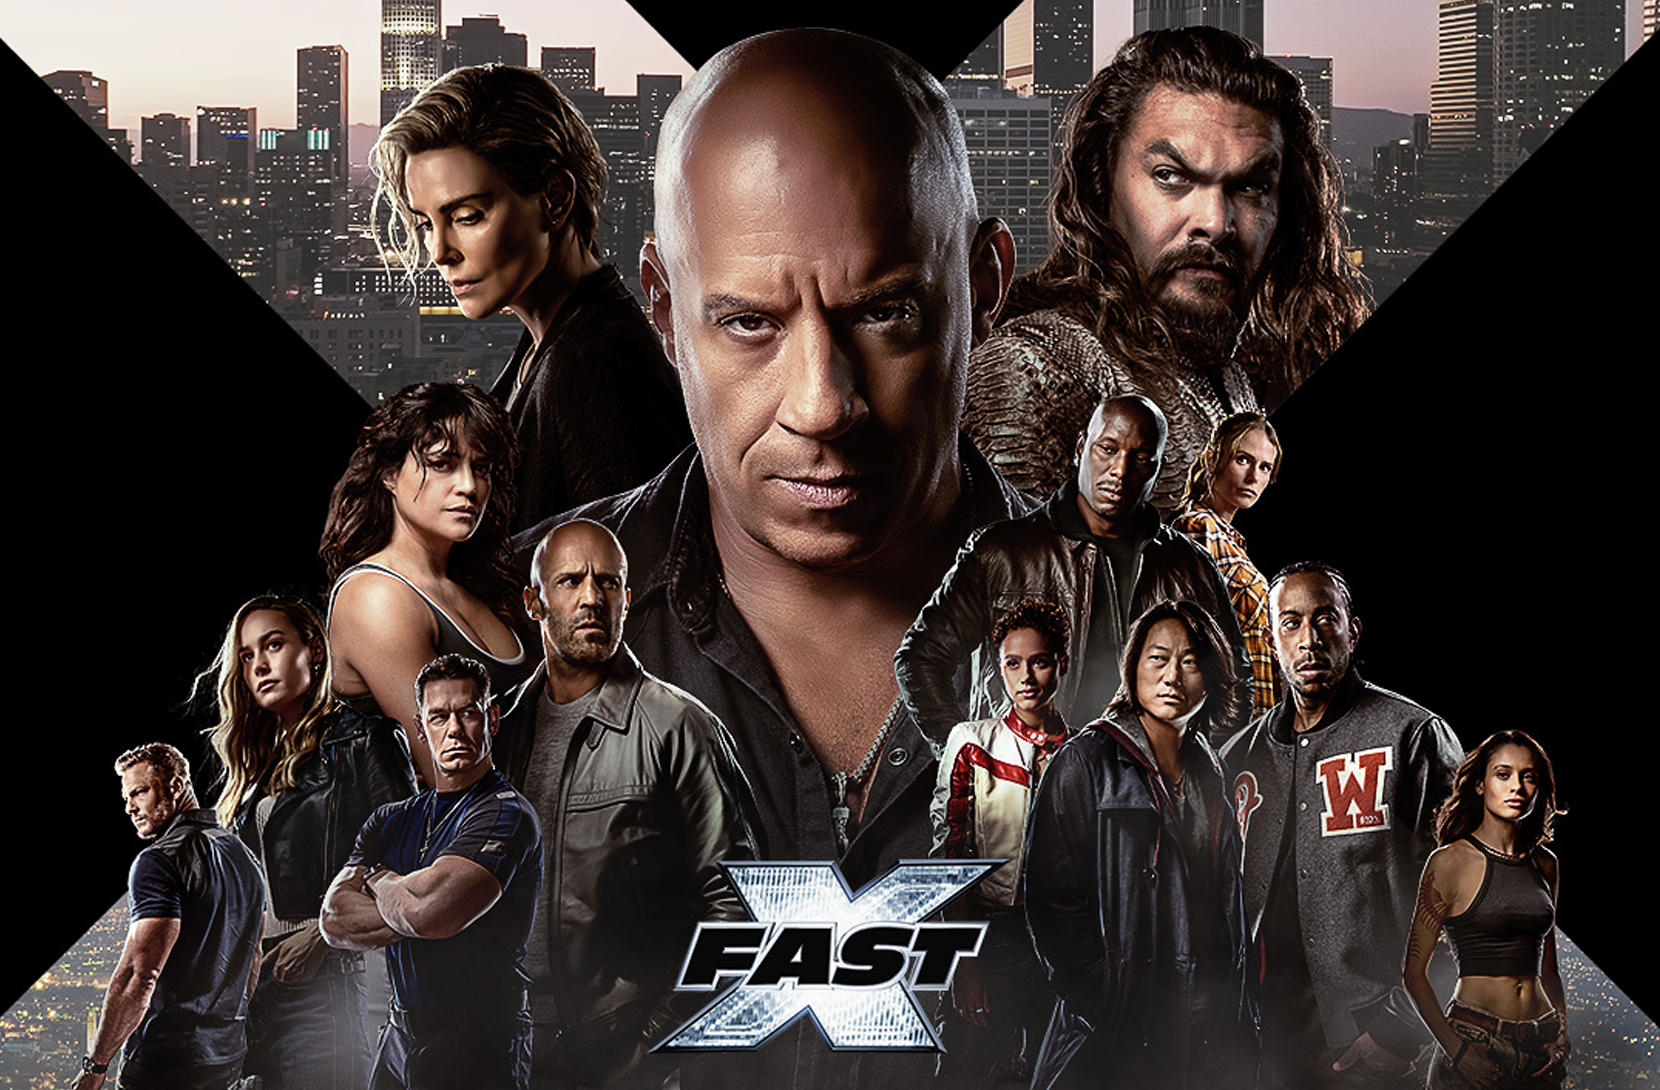 fast X” Available On Vudu Starting June 9 Plus, Enjoy The 10-film “fast and Furious” Bundle NBCUNIVERSAL MEDIA